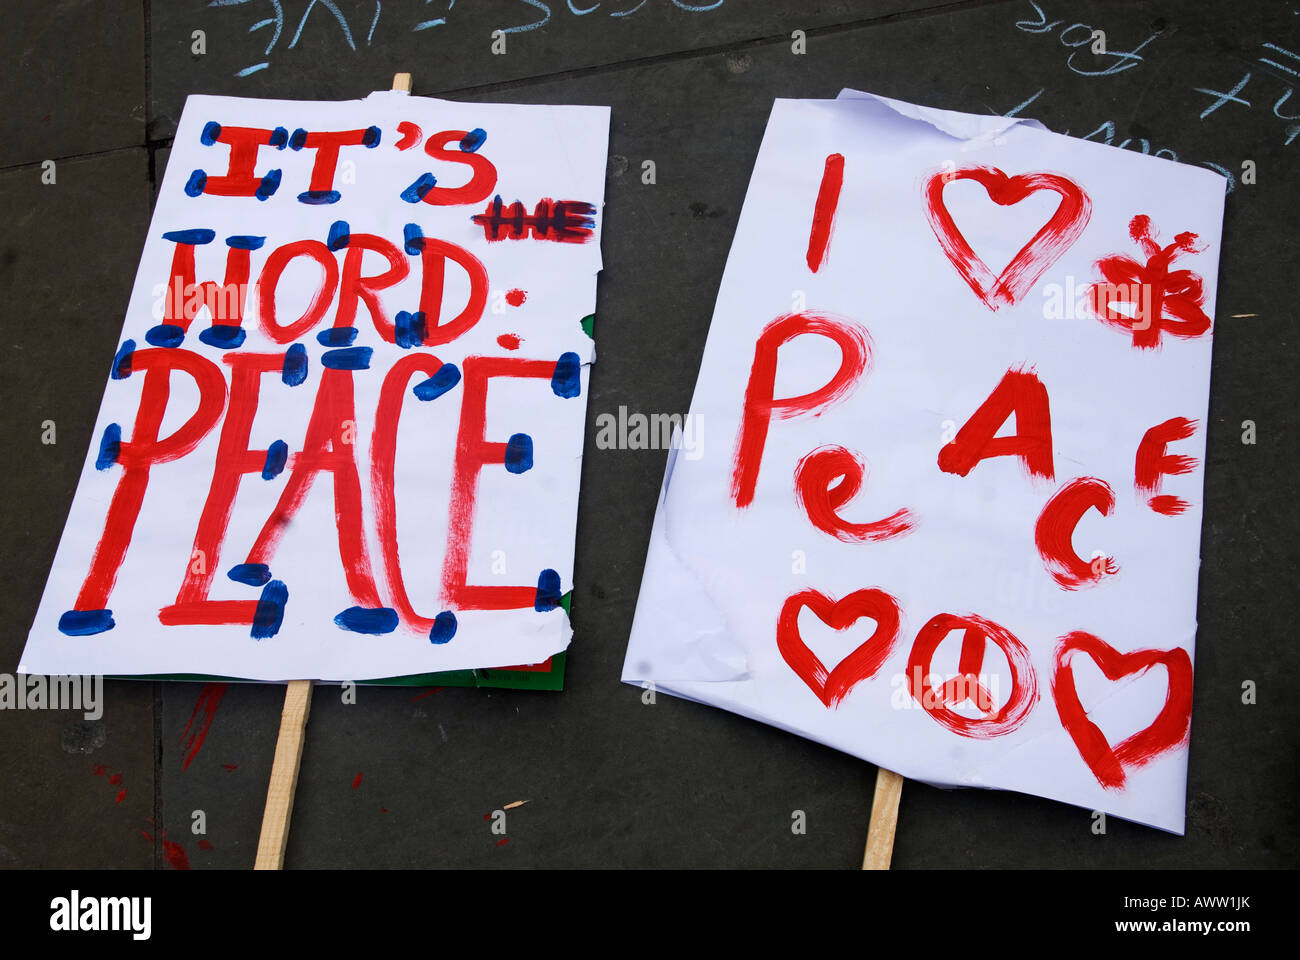 Demonstration to mark 5 years of war in Iraq.Peace messages written on placards in Trafalgar Square Stock Photo